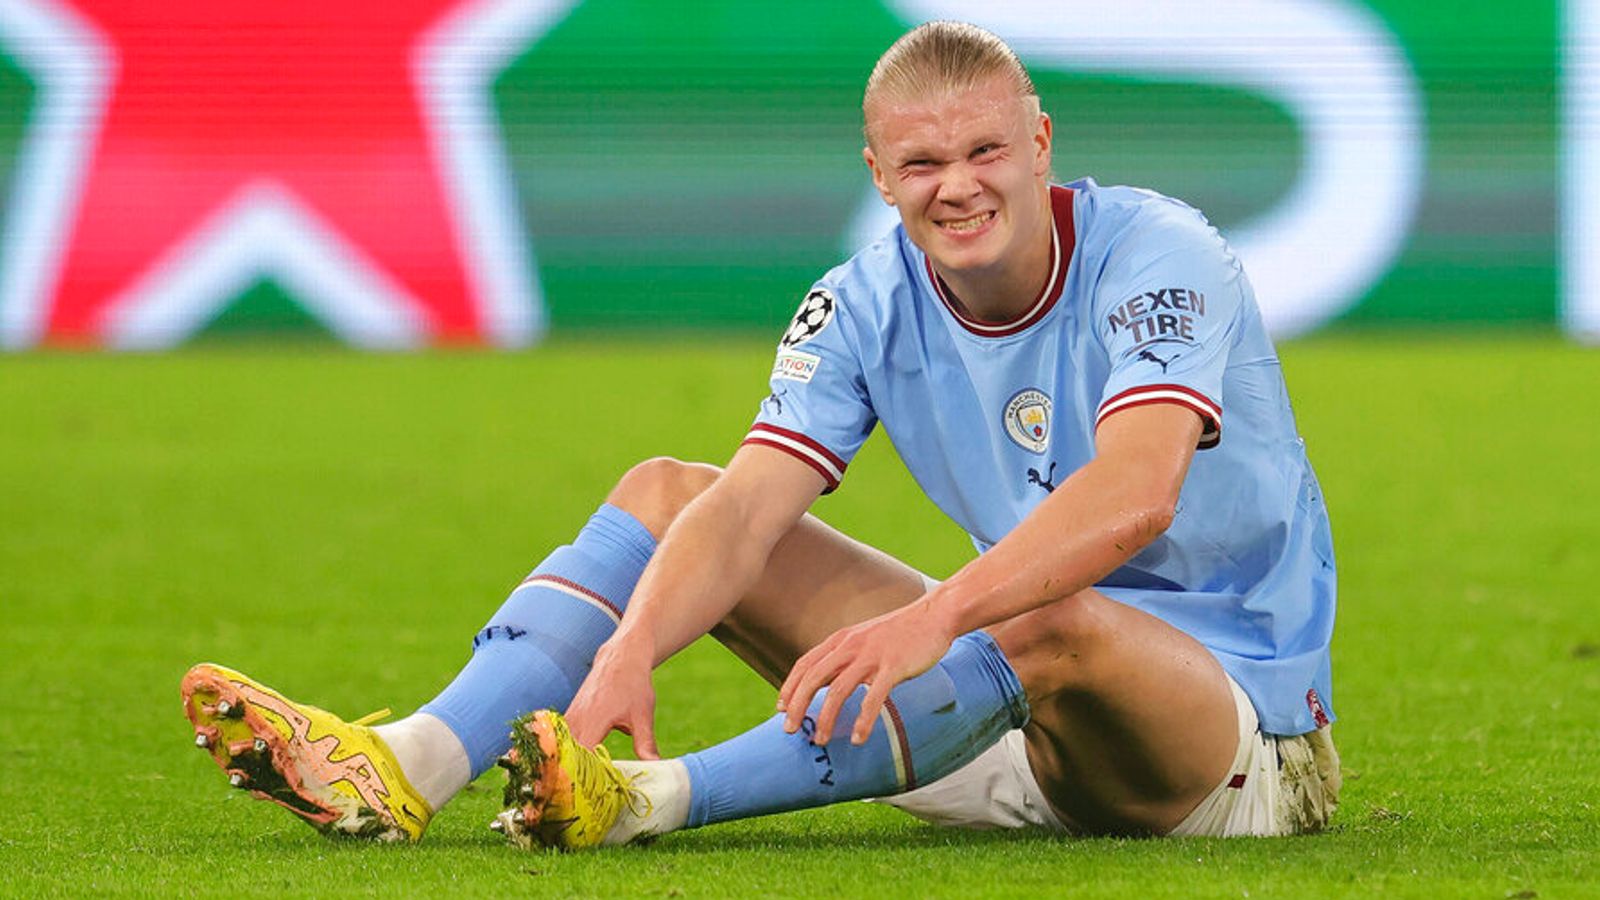 erling-haaland-feels-better-but-needs-to-be-assessed-ahead-of-man-city-s-game-against-leicester-says-pep-guardiola